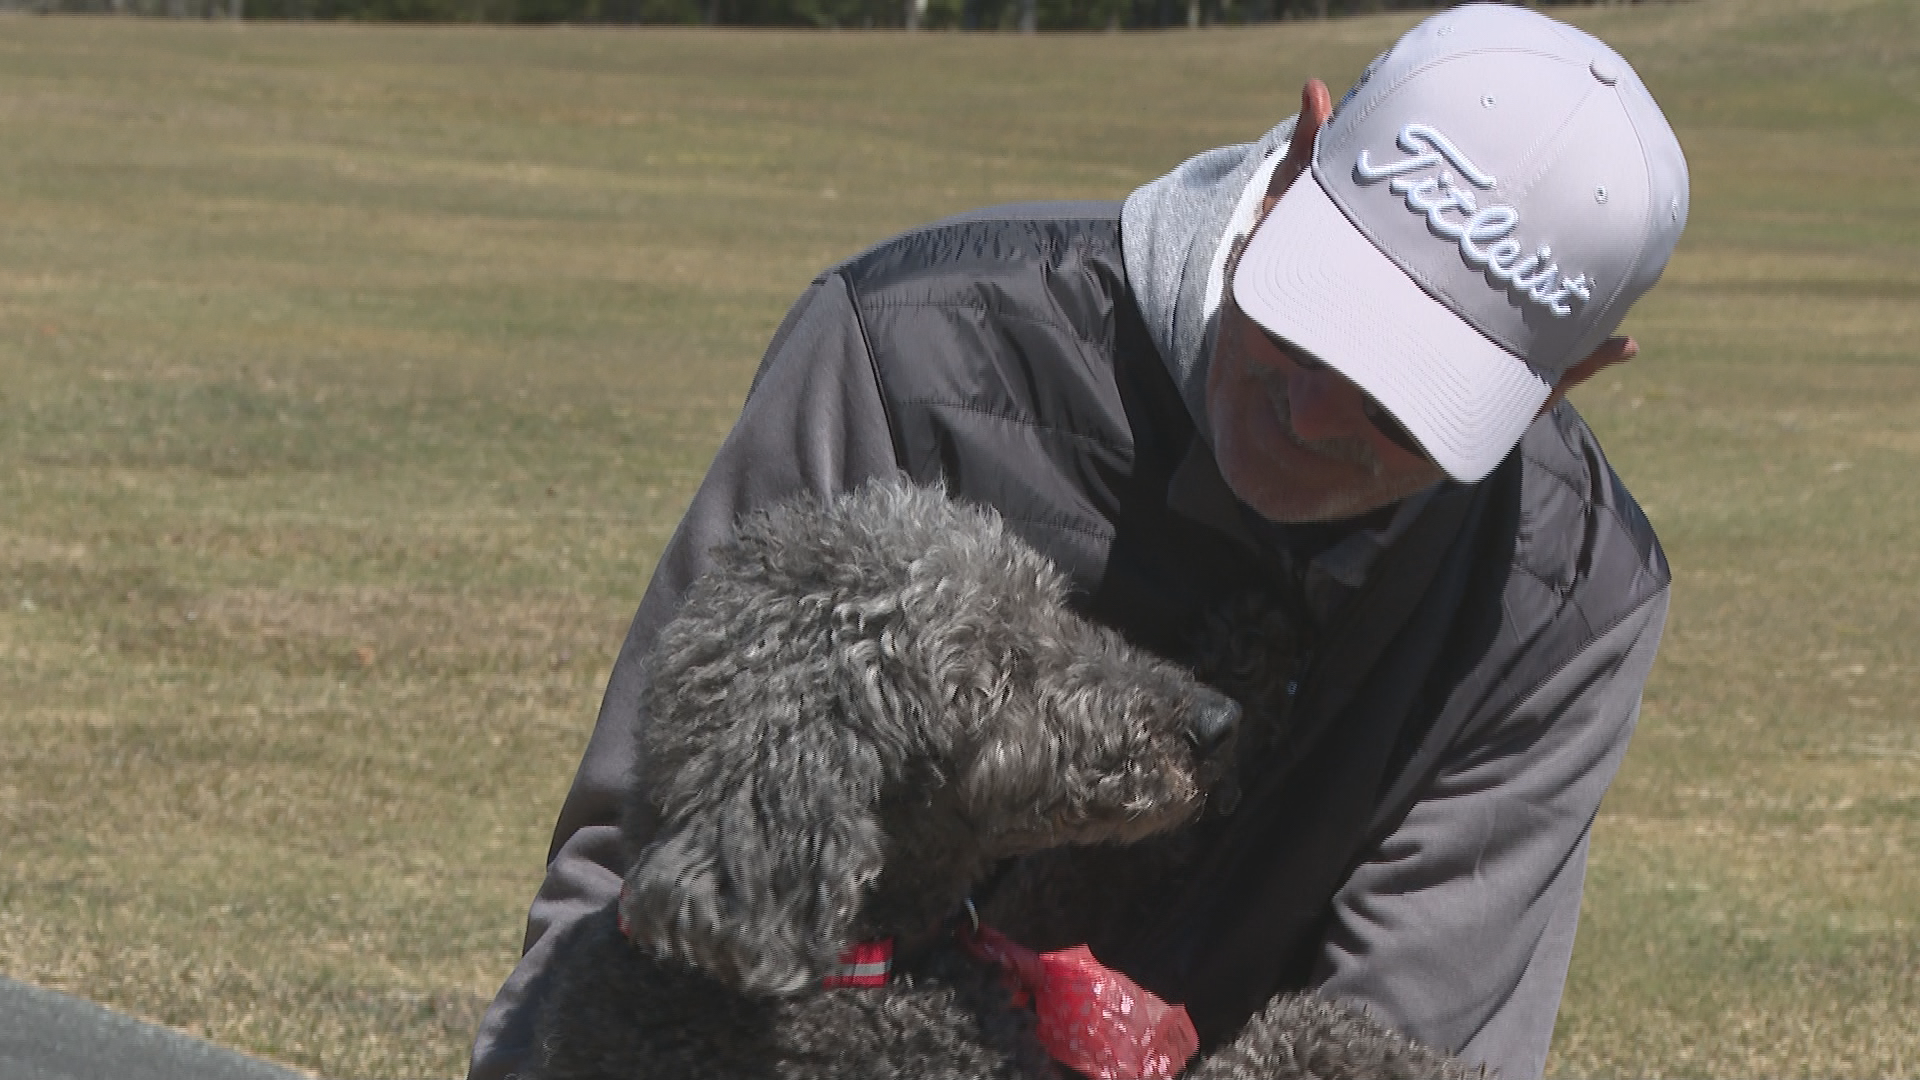 Andrew McGrath stops to greet one of the dogs walking with its owners at the Granite Springs Golf Club.